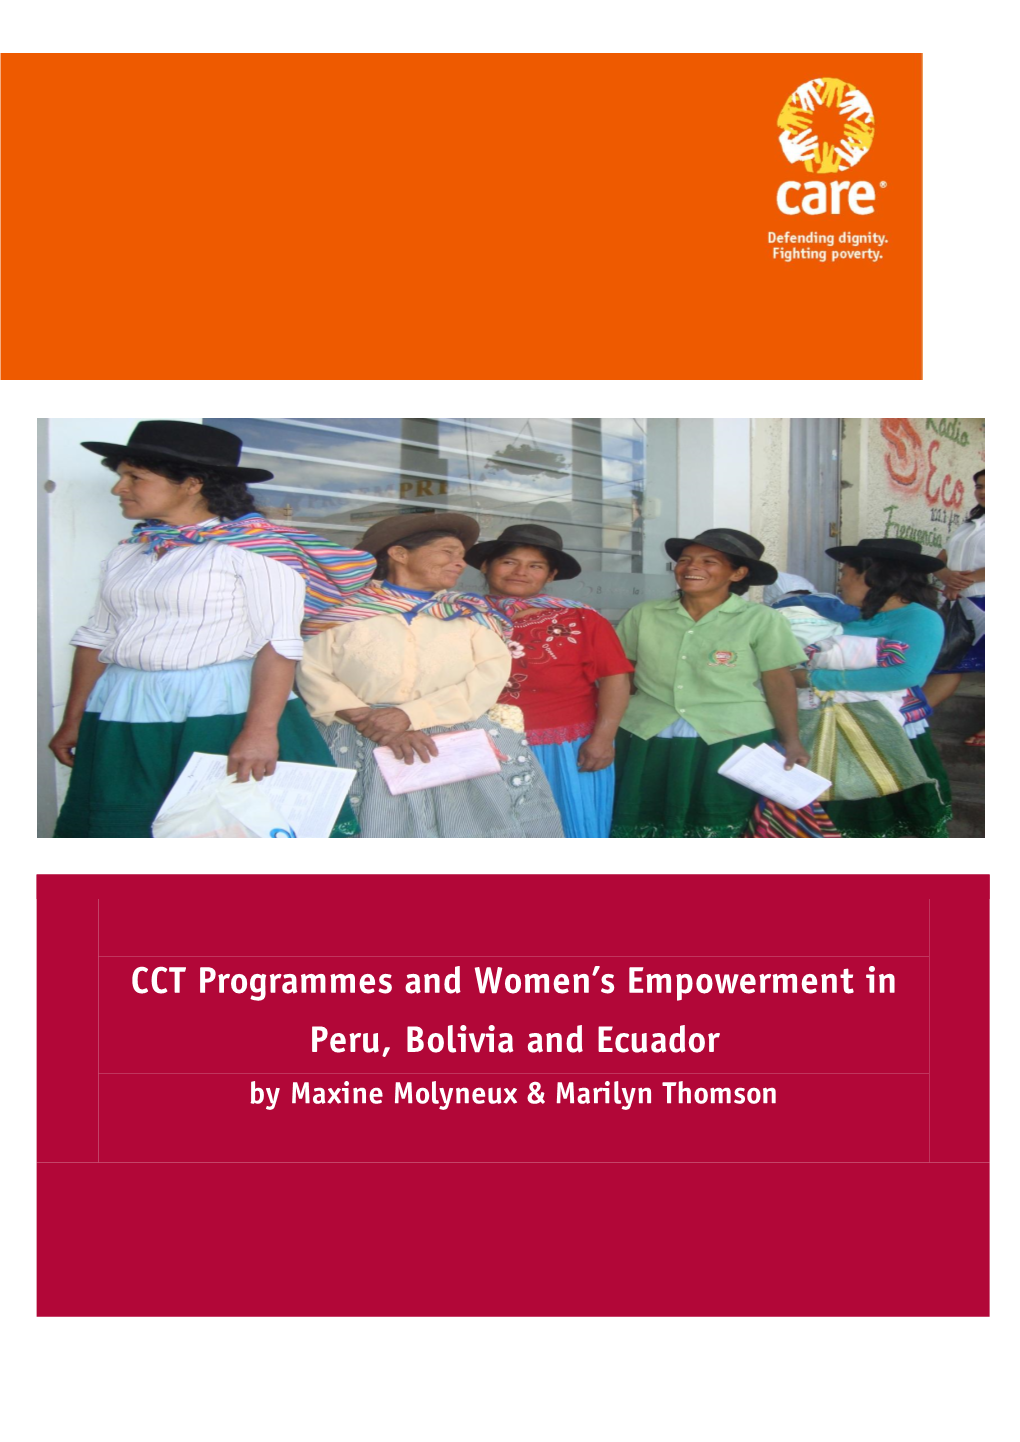 CCT Programmes and Women's Empowerment In